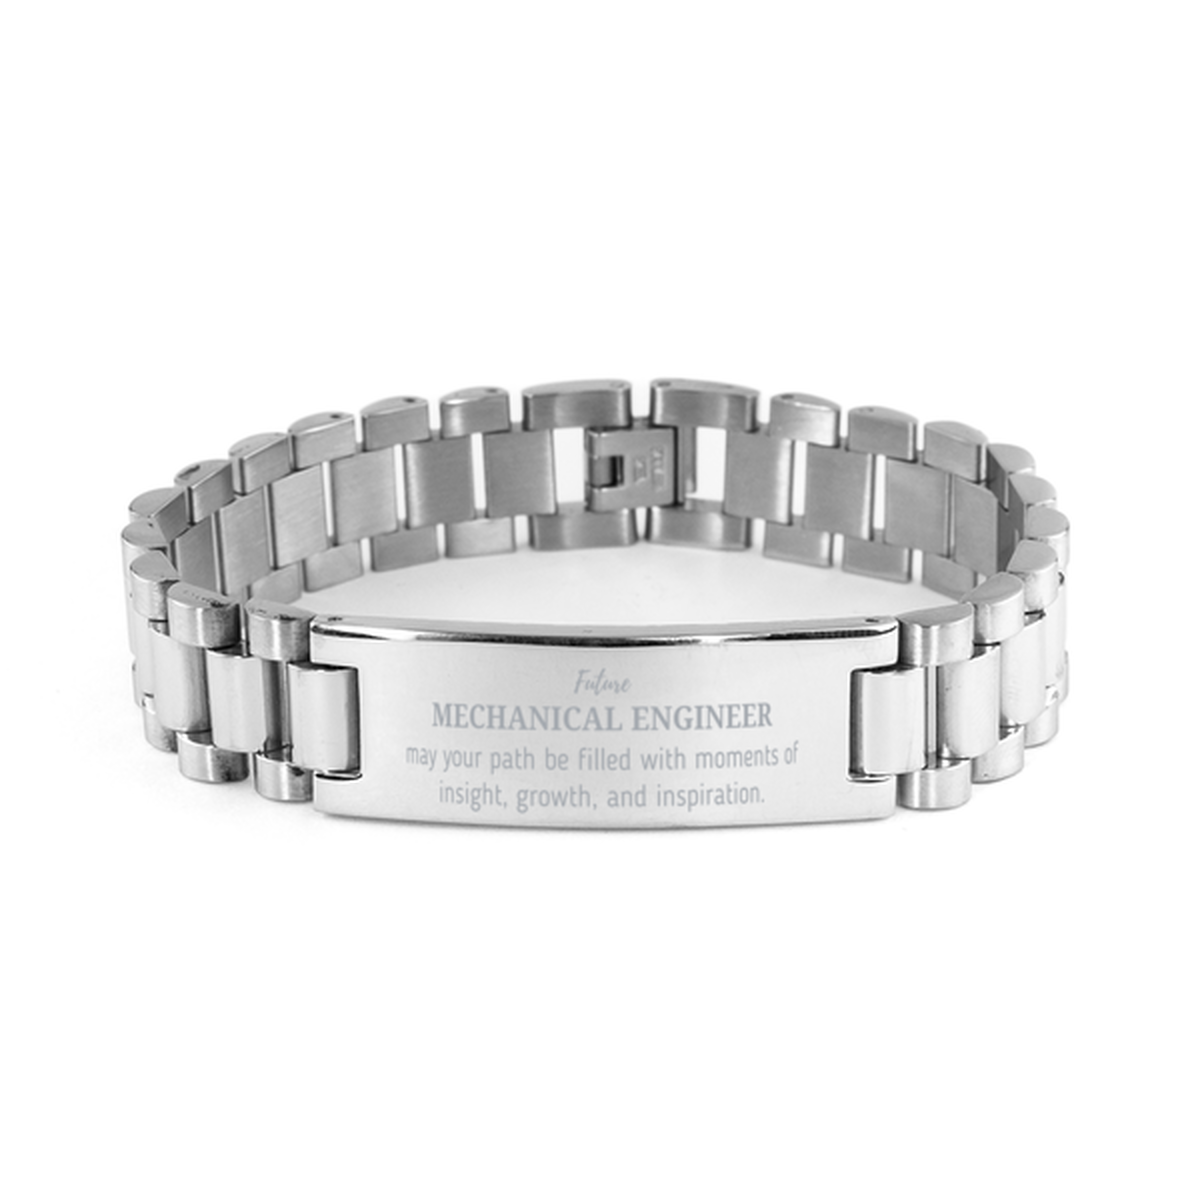 Future Mechanical Engineer Gifts, May your path be filled with moments of insight, Graduation Gifts for New Mechanical Engineer, Christmas Unique Ladder Stainless Steel Bracelet For Men, Women, Friends